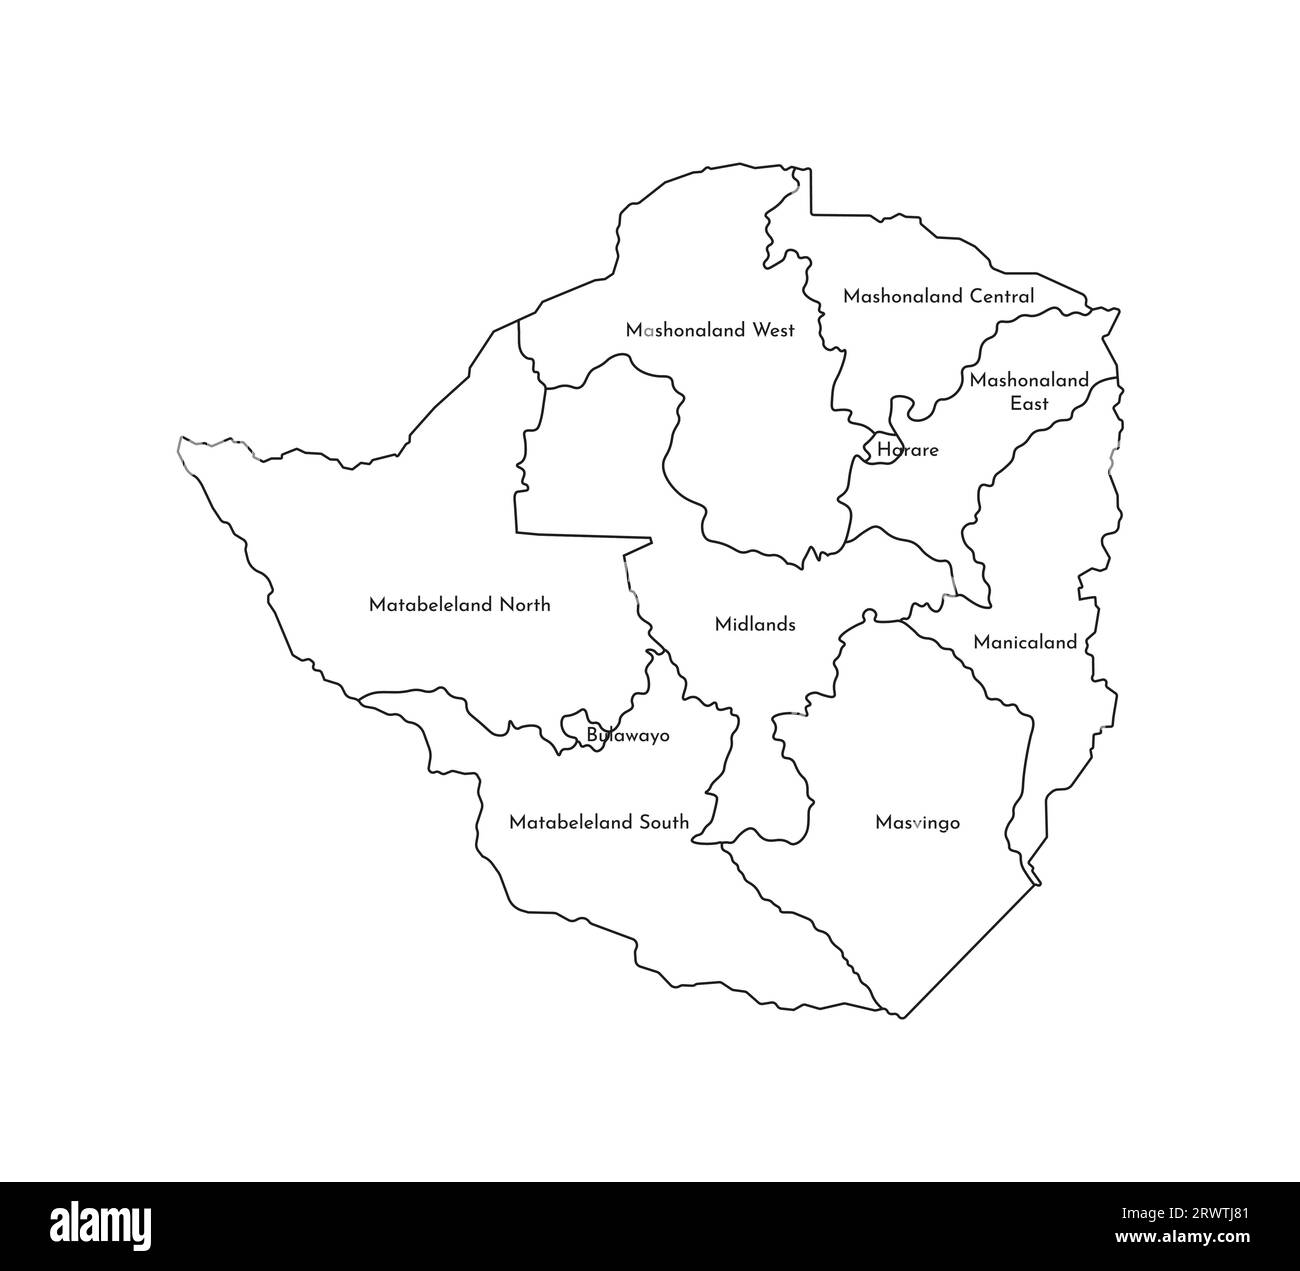 Vector isolated illustration of simplified administrative map of Zimbabwe. Borders and names of the provinces (regions). Black line silhouettes. Stock Vector